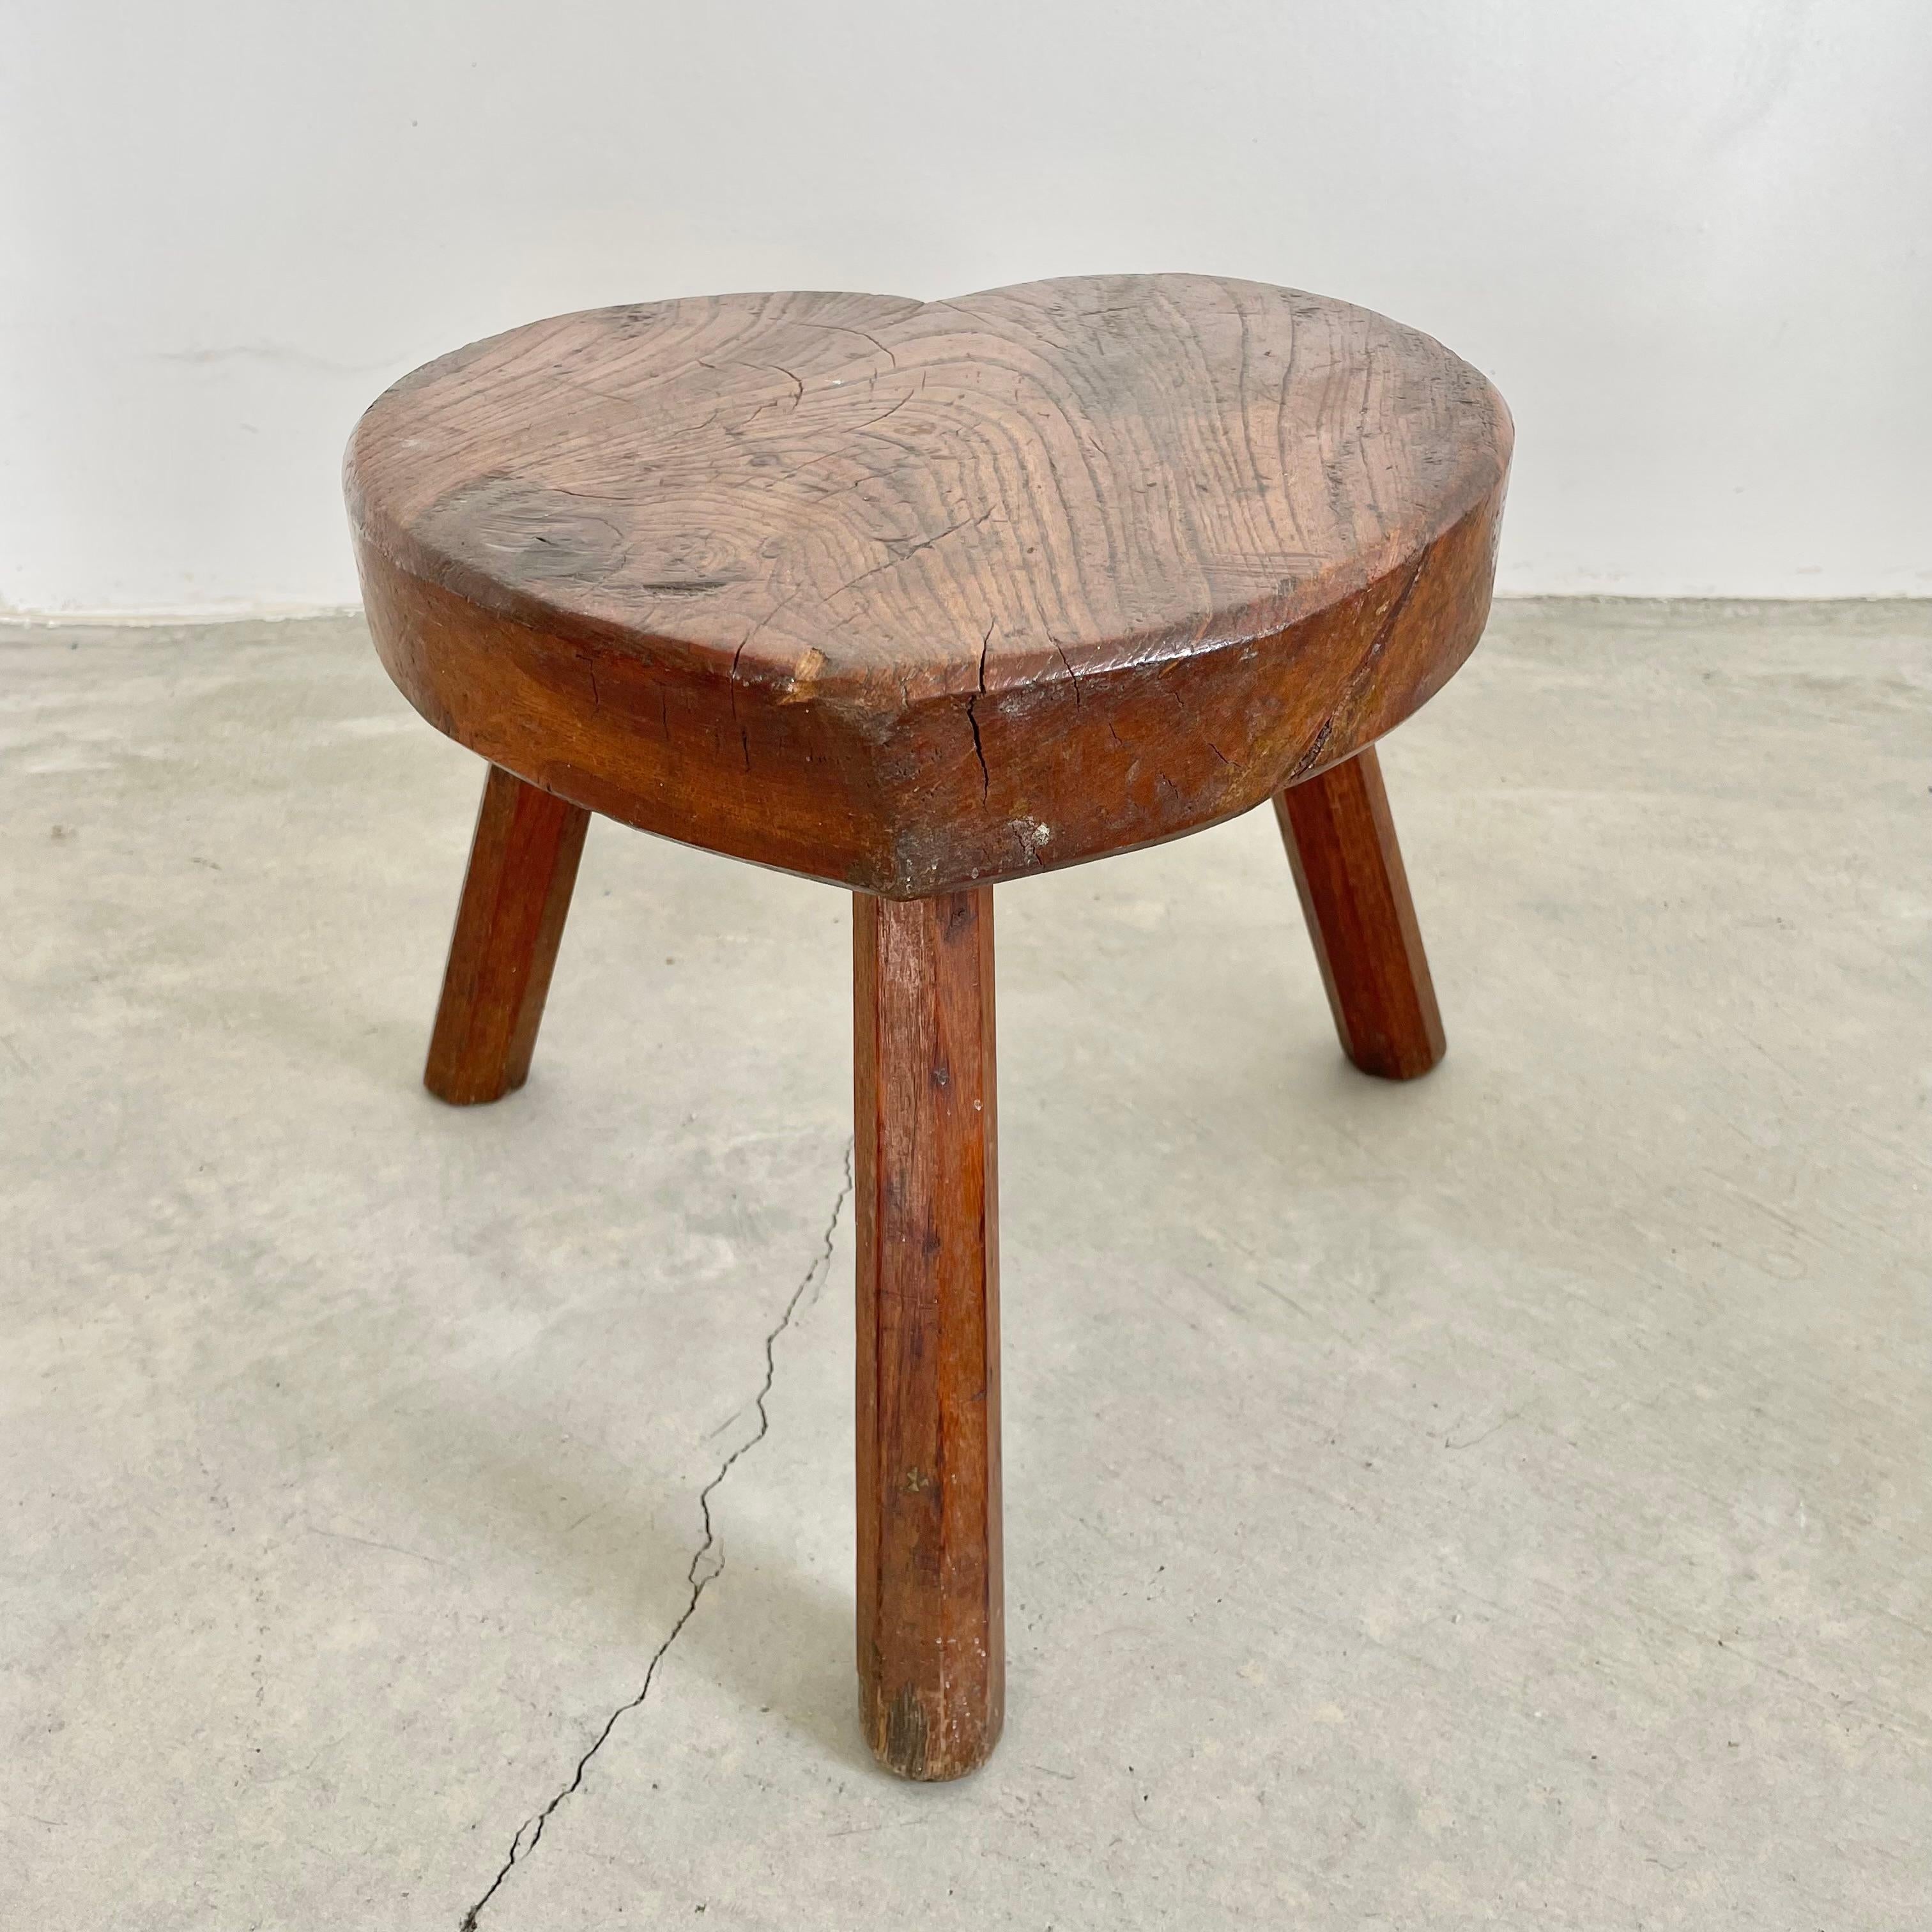 Unique heart tripod stool made in France, circa 1950s. Substantial and chunky heart shaped seat with three sturdy club legs with faceted sides. Perfect patina and age to this piece. Functional stool. Perfect for books or objects as well. Seat